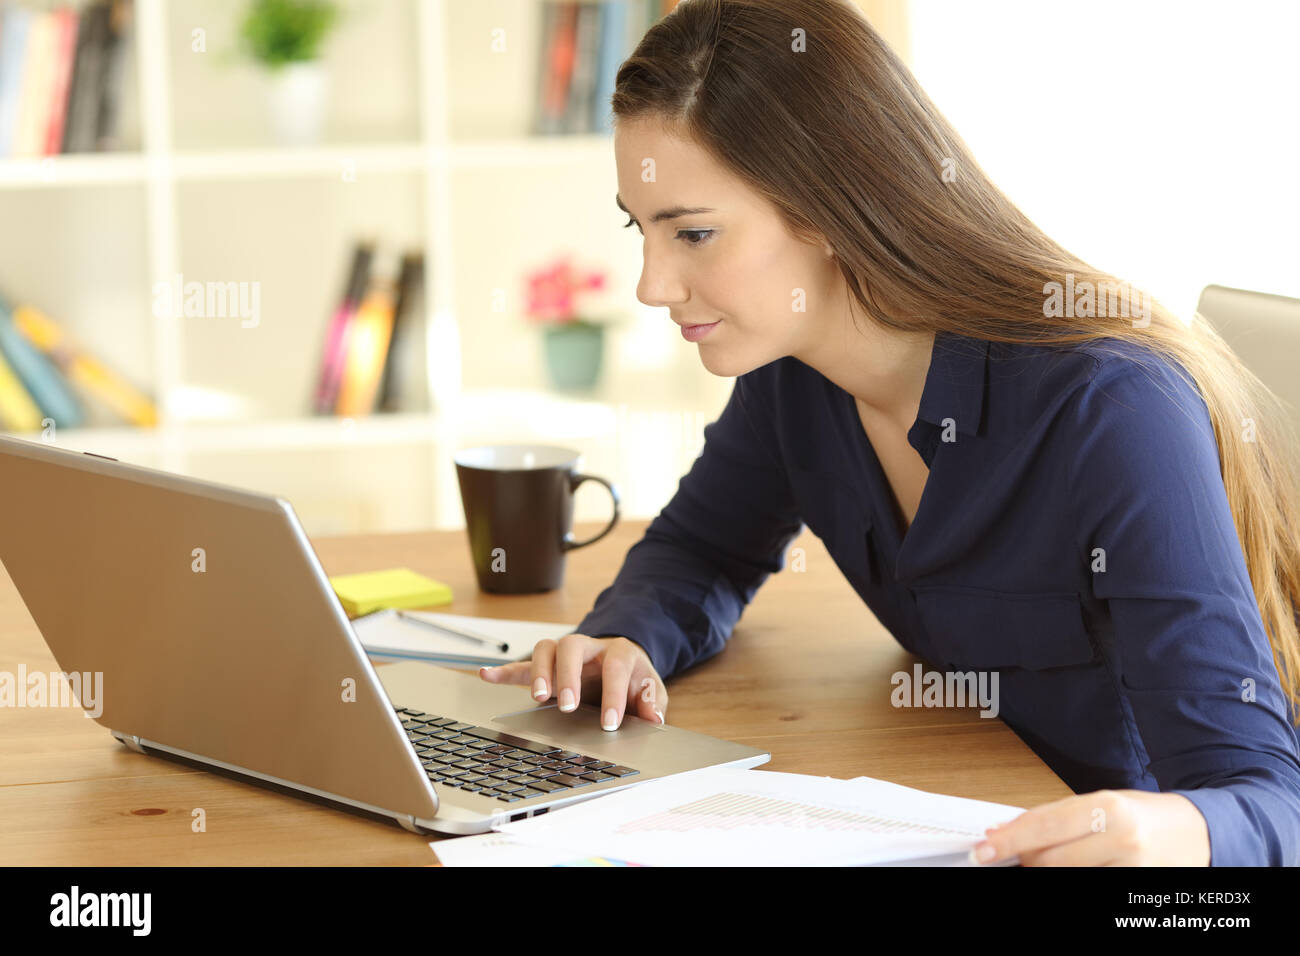 Serious freelance worker working on line with a laptop on a desk at home Stock Photo